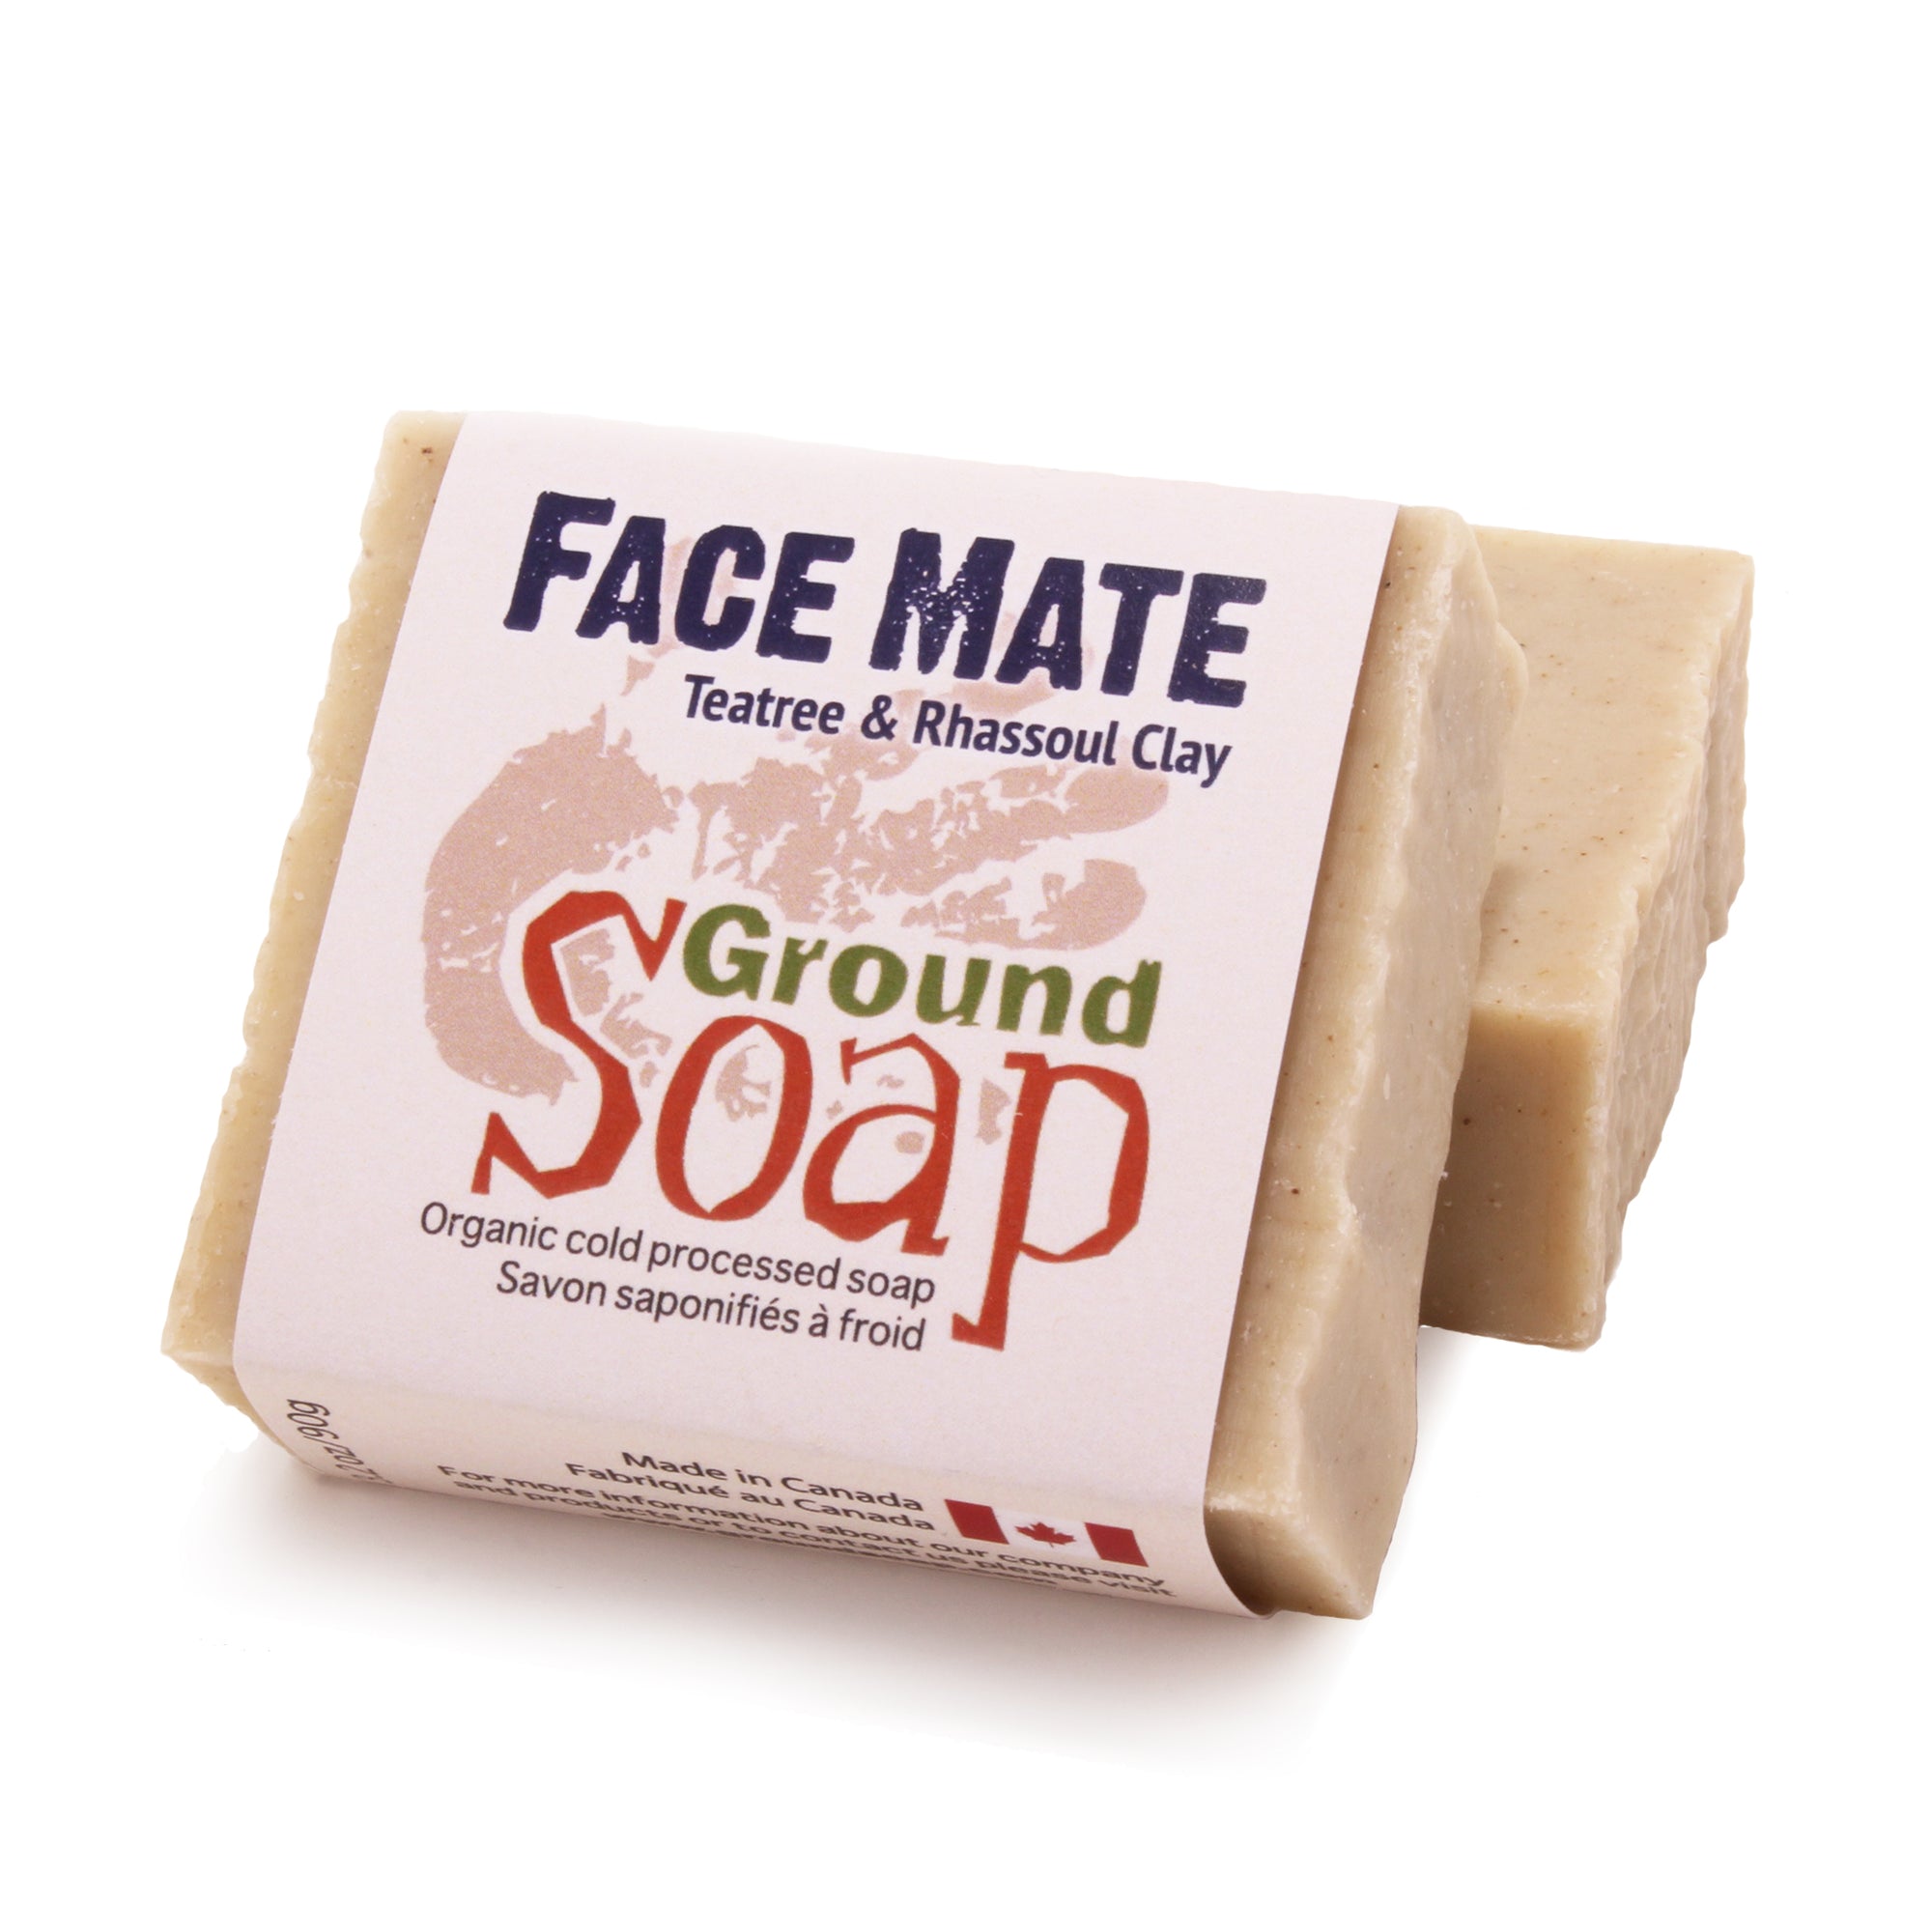 Face Mate - Teatree Oil & Rhassoul Clay -  Small Size Organic Bar Soap